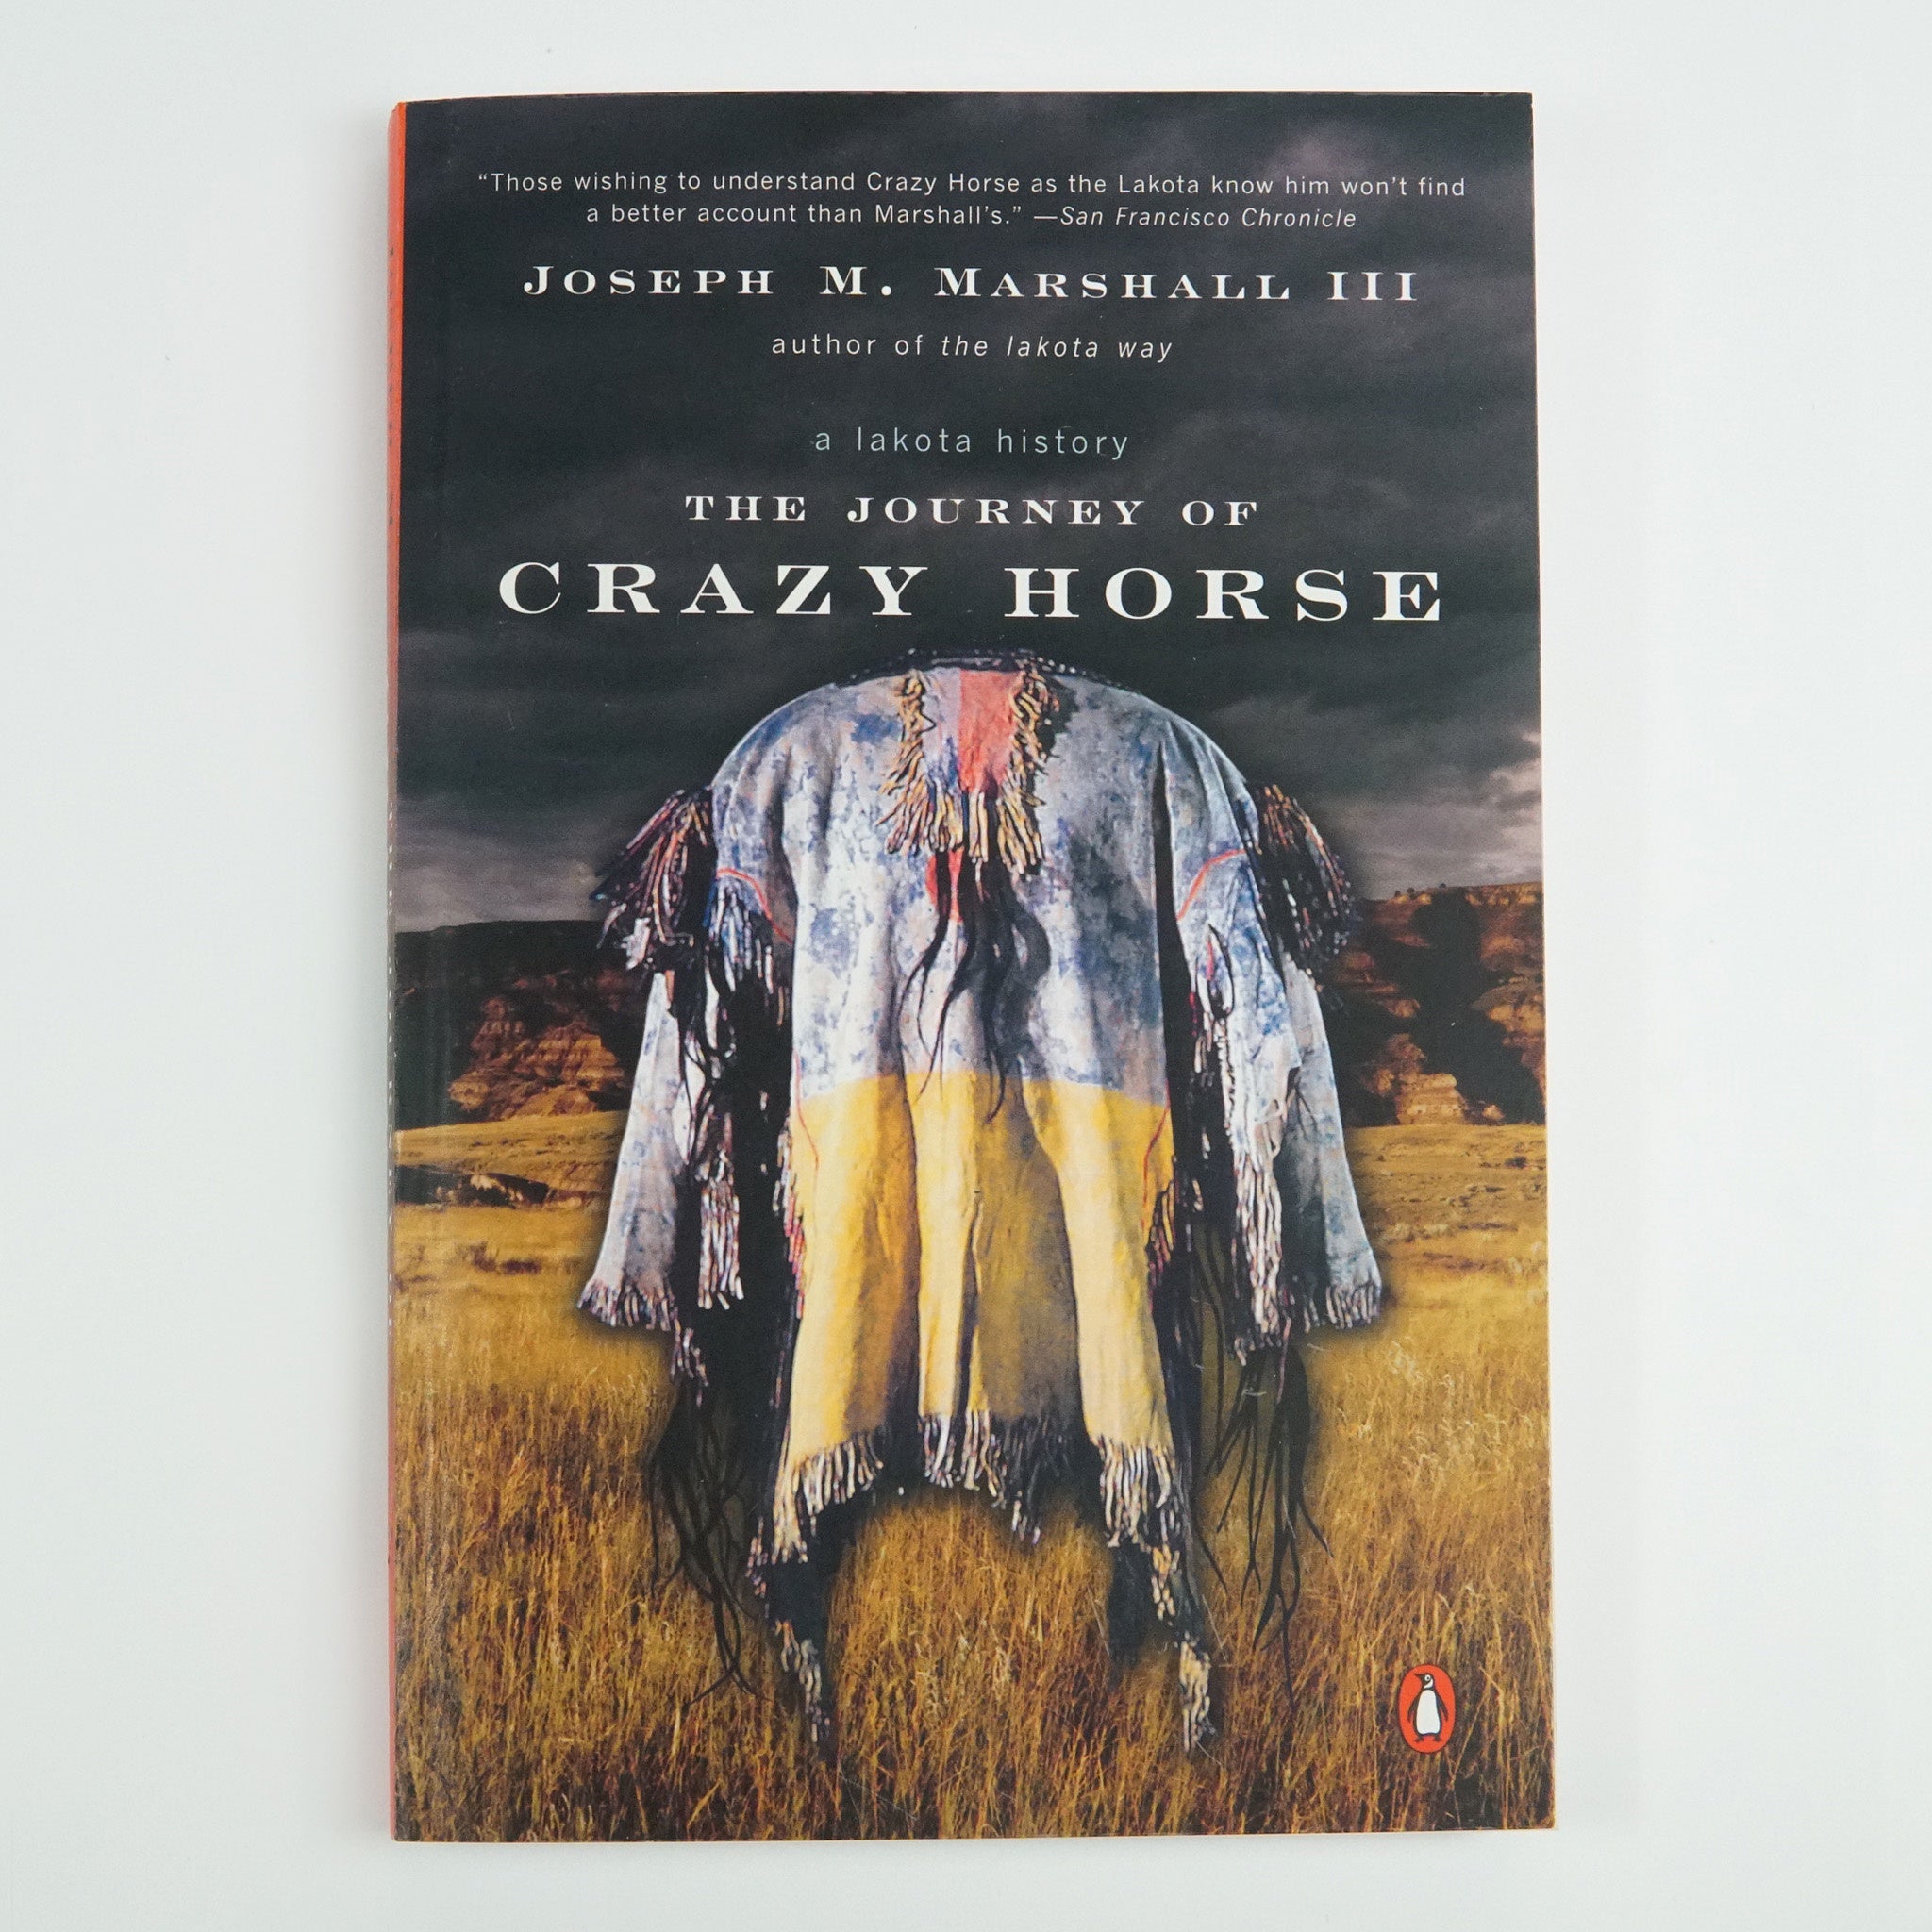 BK 12 THE JOURNEY OF CRAZY HORSE BY JOSEPH M. MARSHALL III #21024851 D2 MAY23